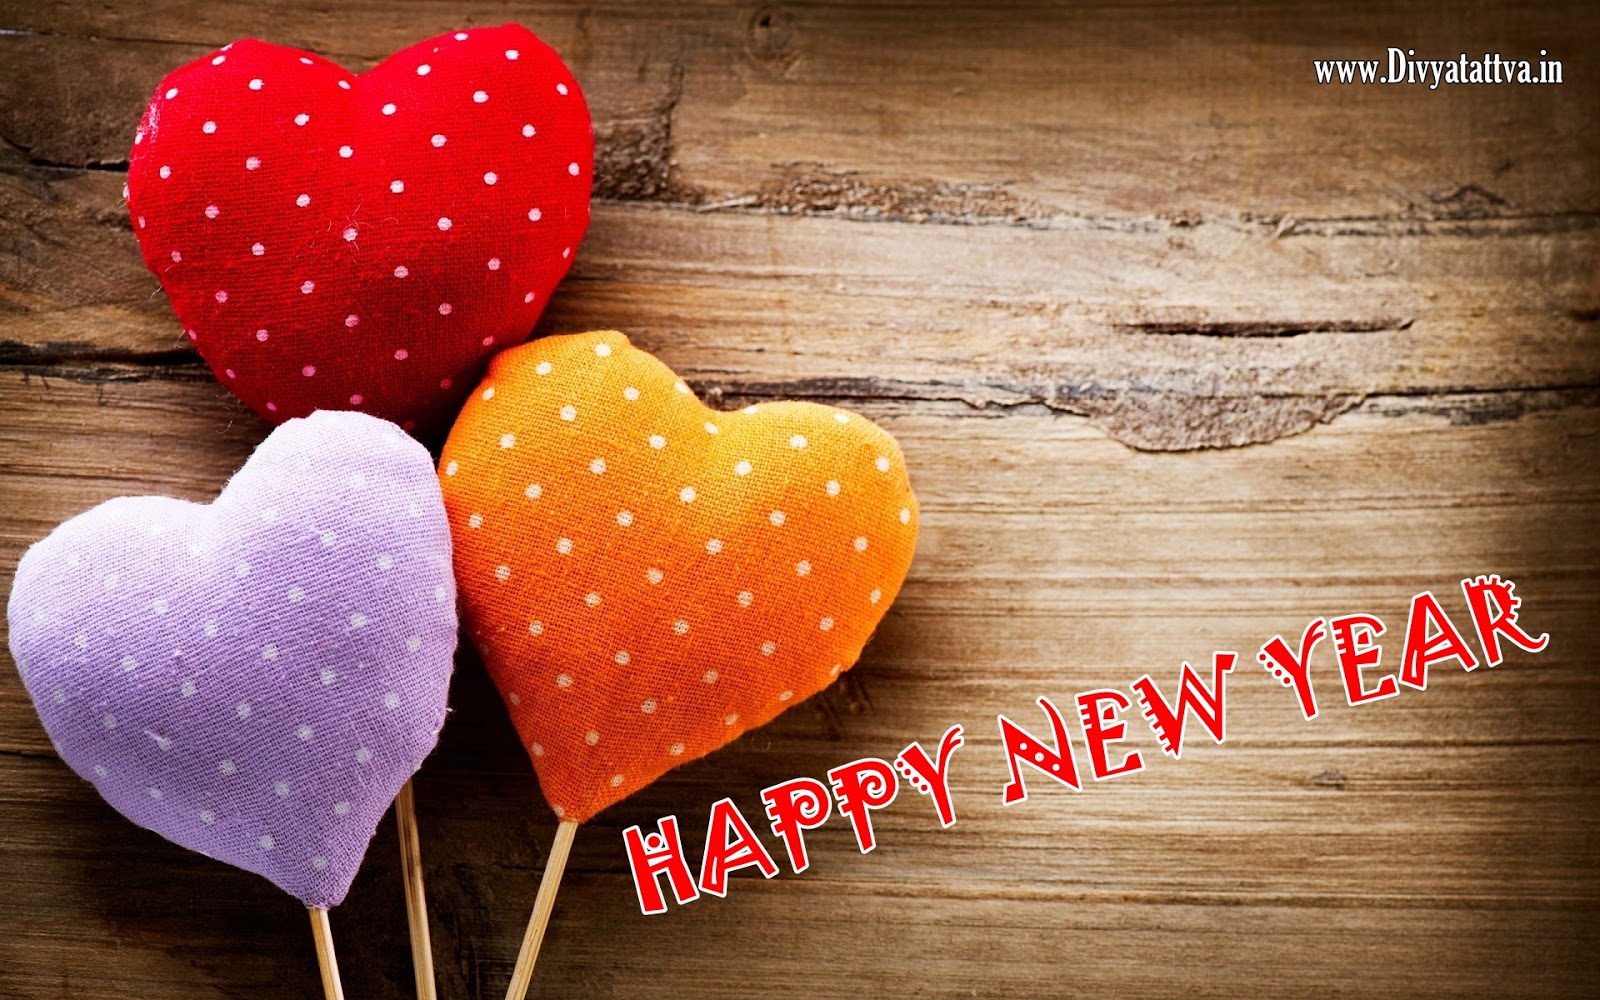 Happy New Year Photos And Pictures For Free, New Year - Good Night Images Hd Love - HD Wallpaper 